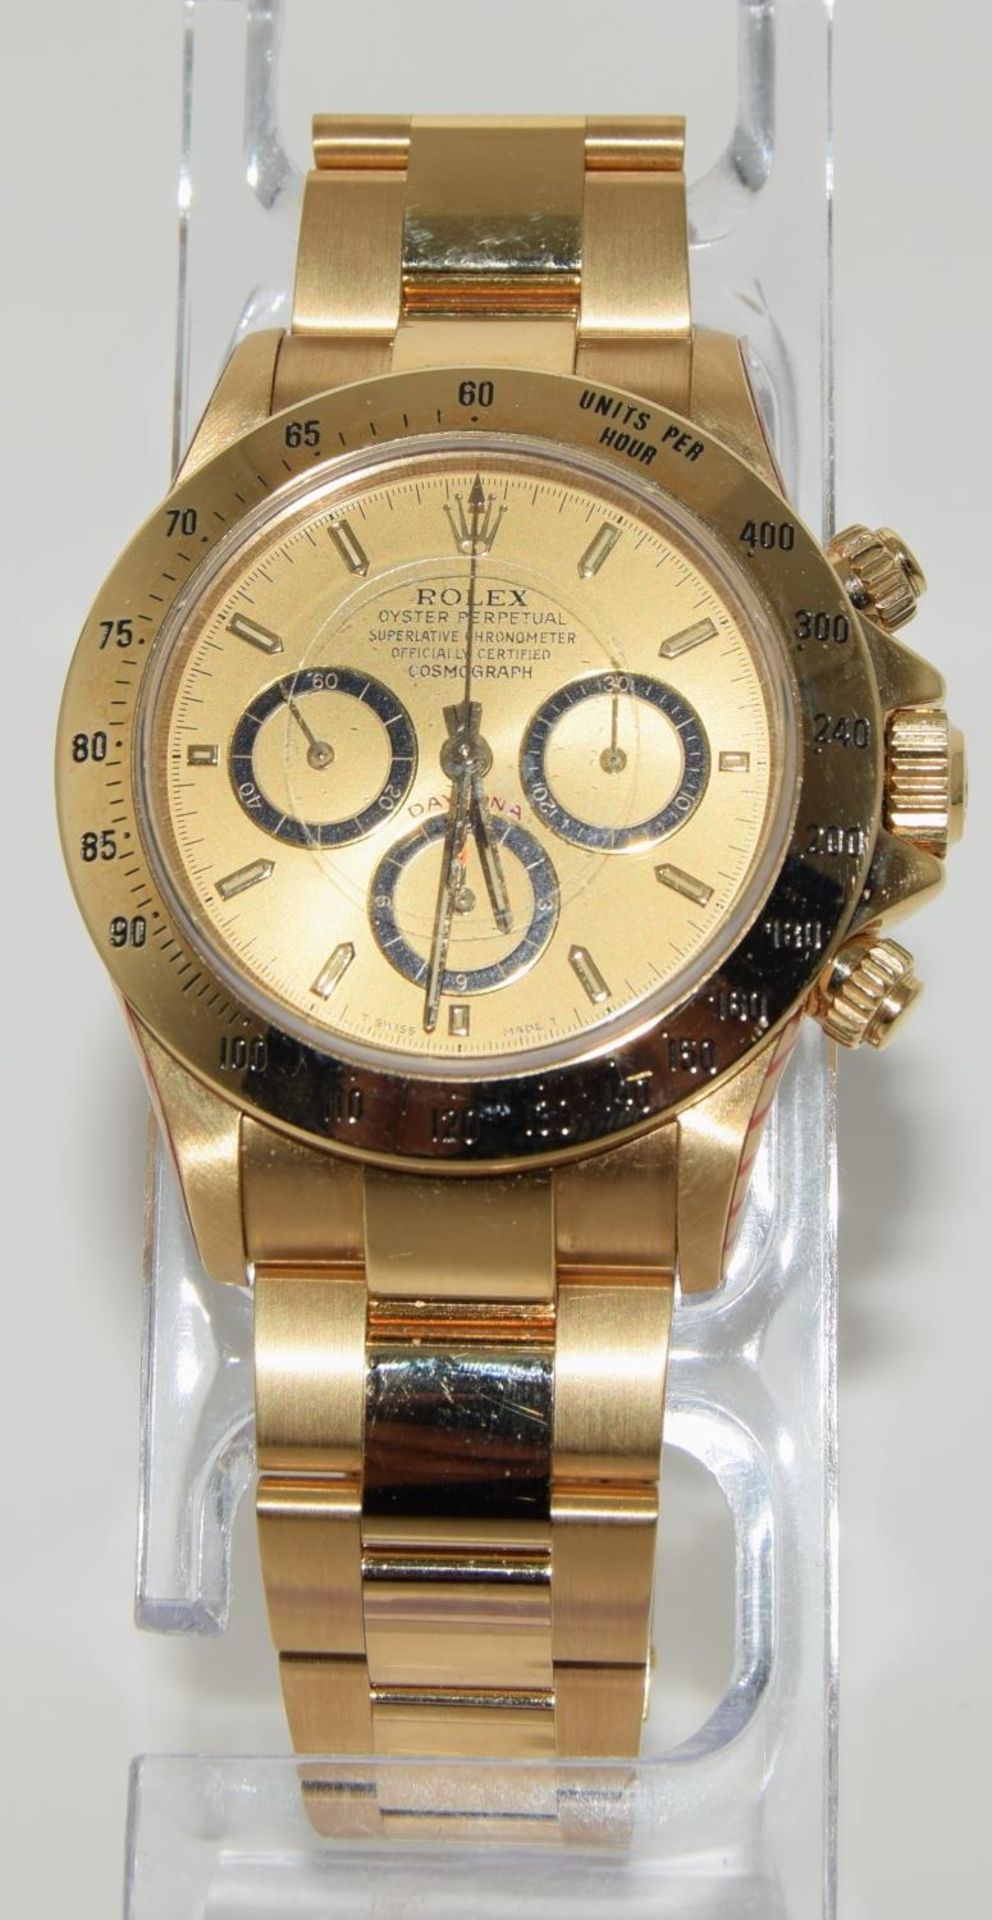 18ct gold Rolex Daytona model 16528, 1991, boxed and papers with service record. (ref 52) - Image 3 of 10